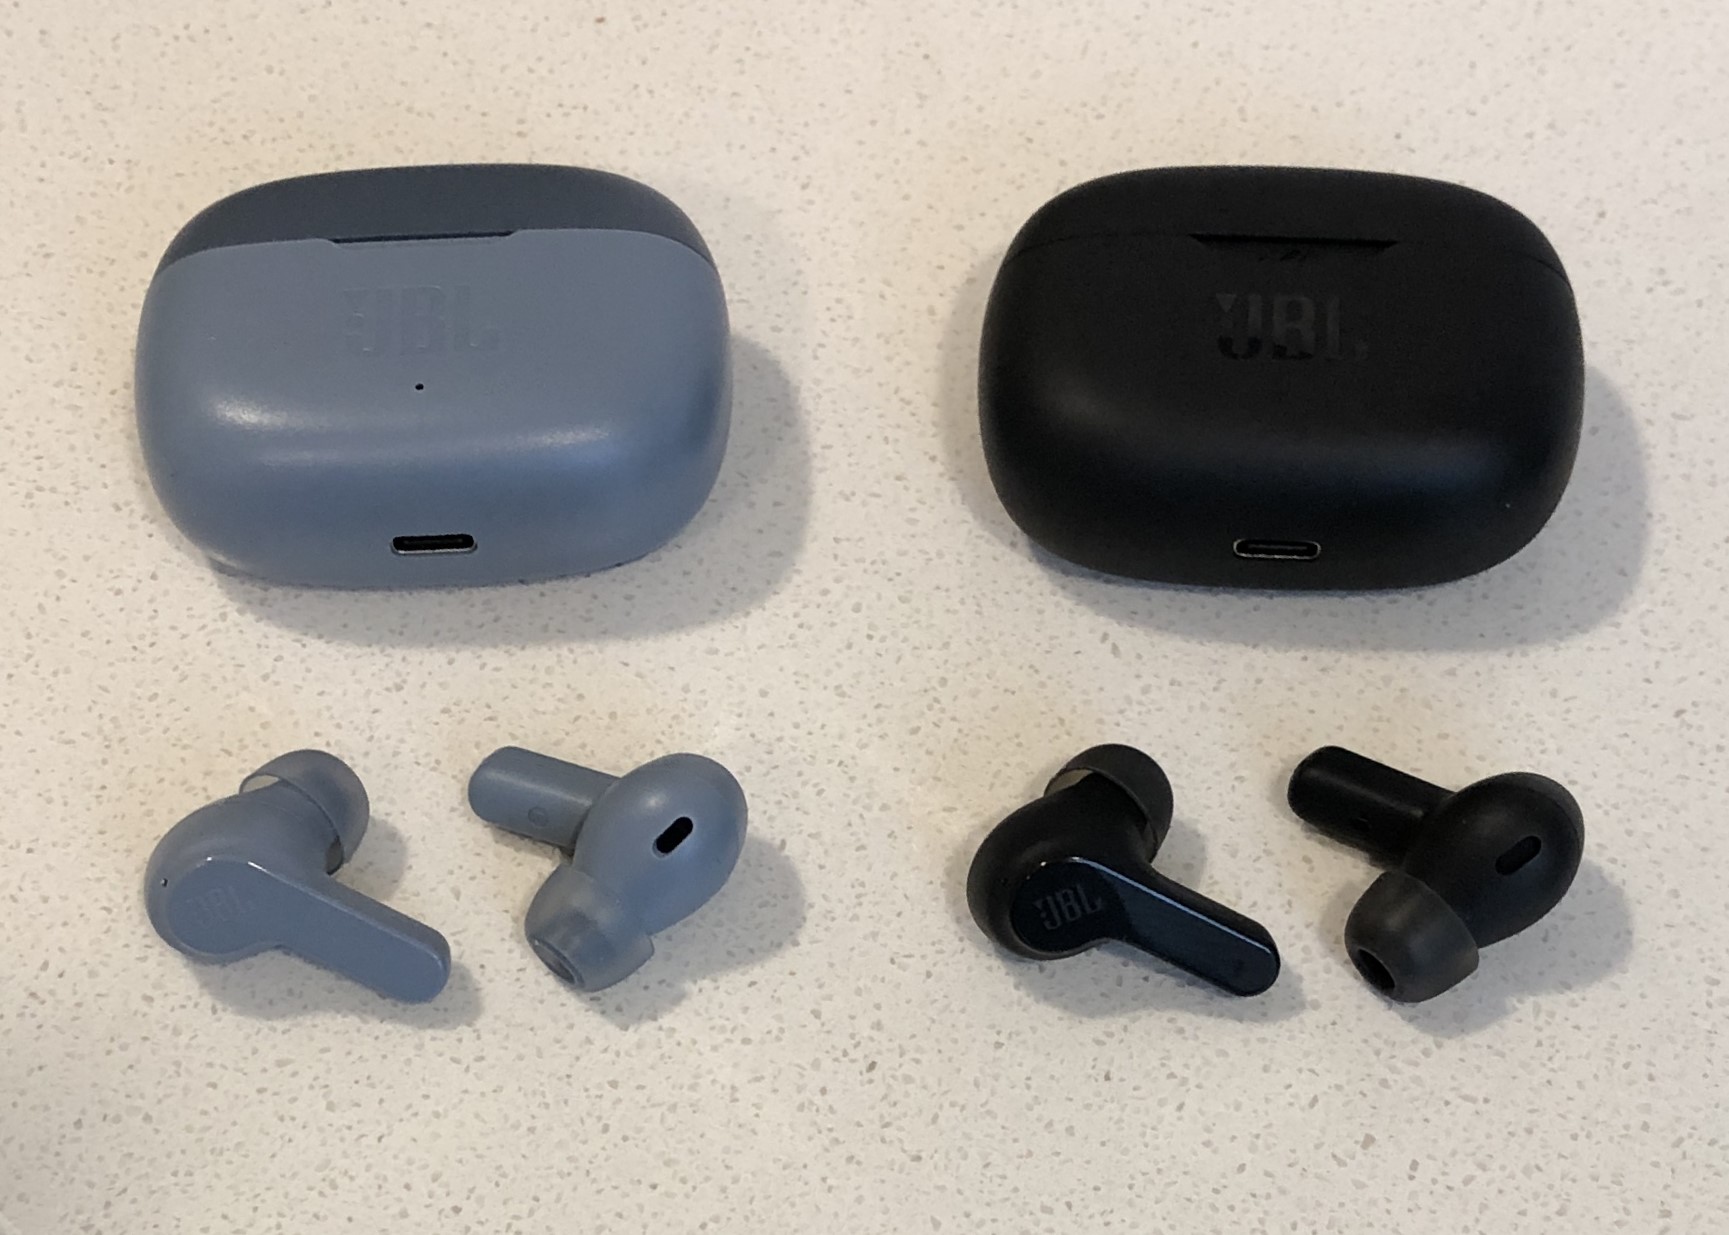 JBL Vibe 200TWS vs Vibe Beam wireless earbuds and charging case